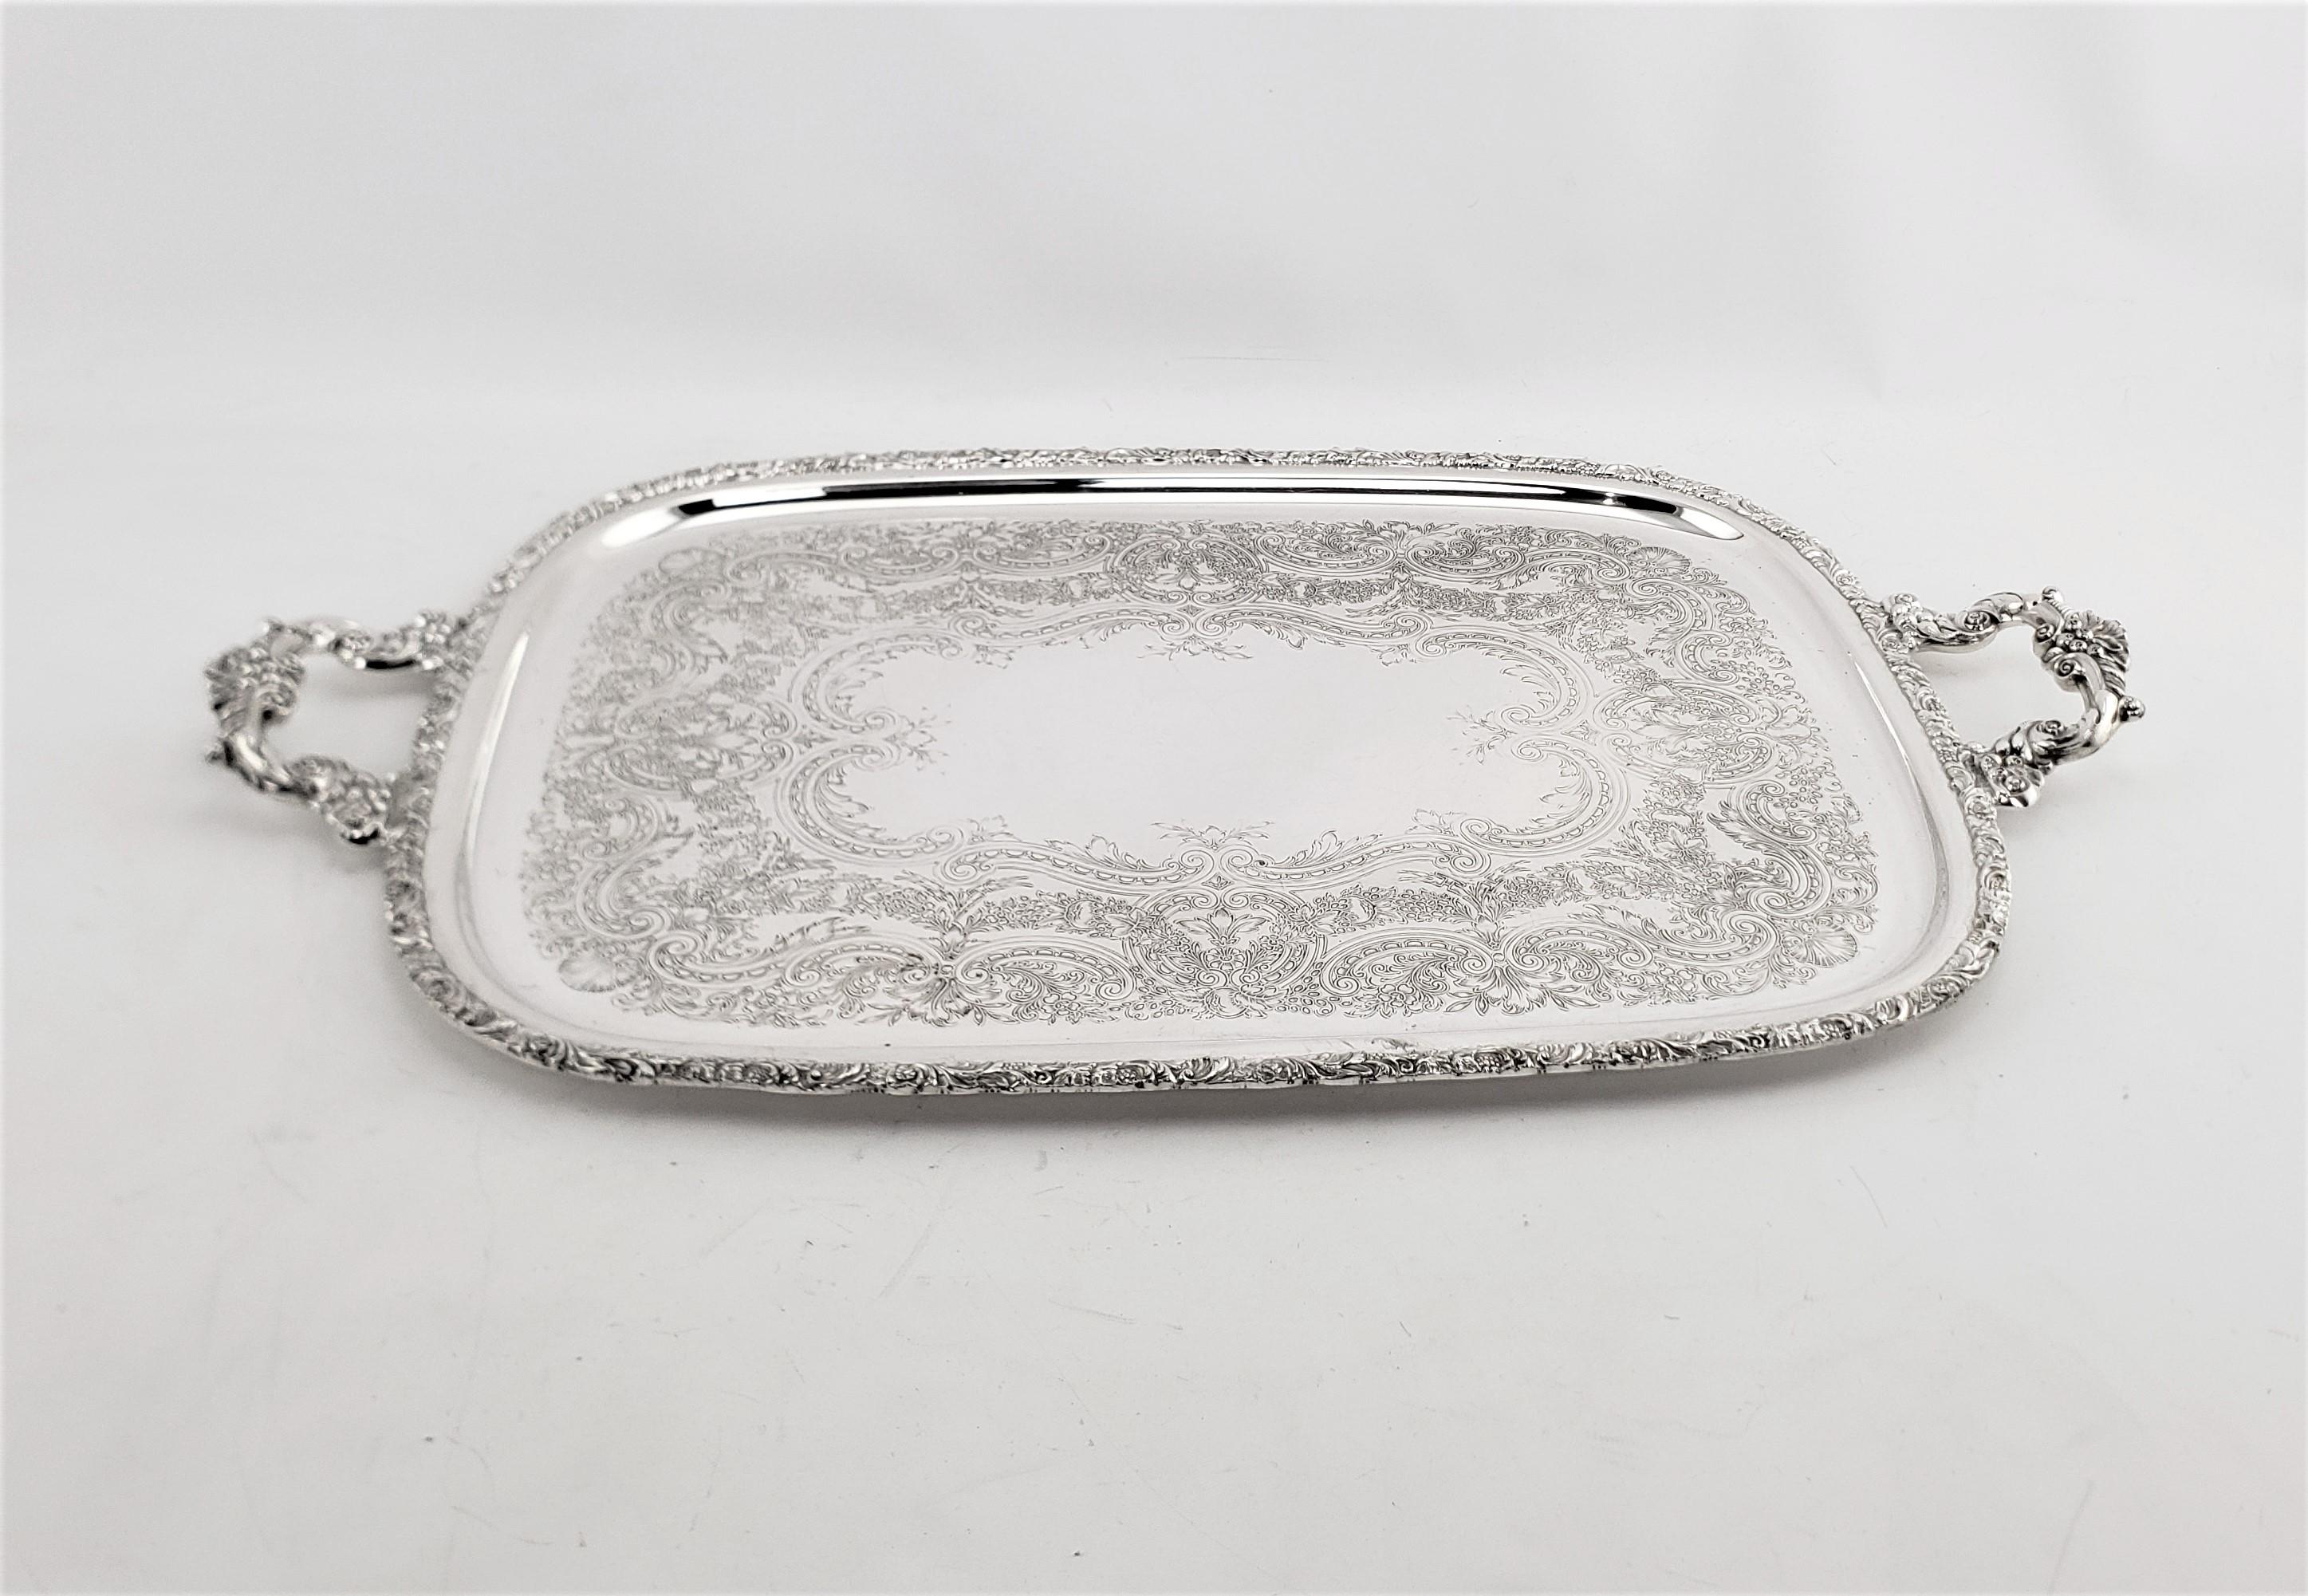 20th Century Large Antique English Silver Plated Serving Tray with Ornate Handles & Engraving